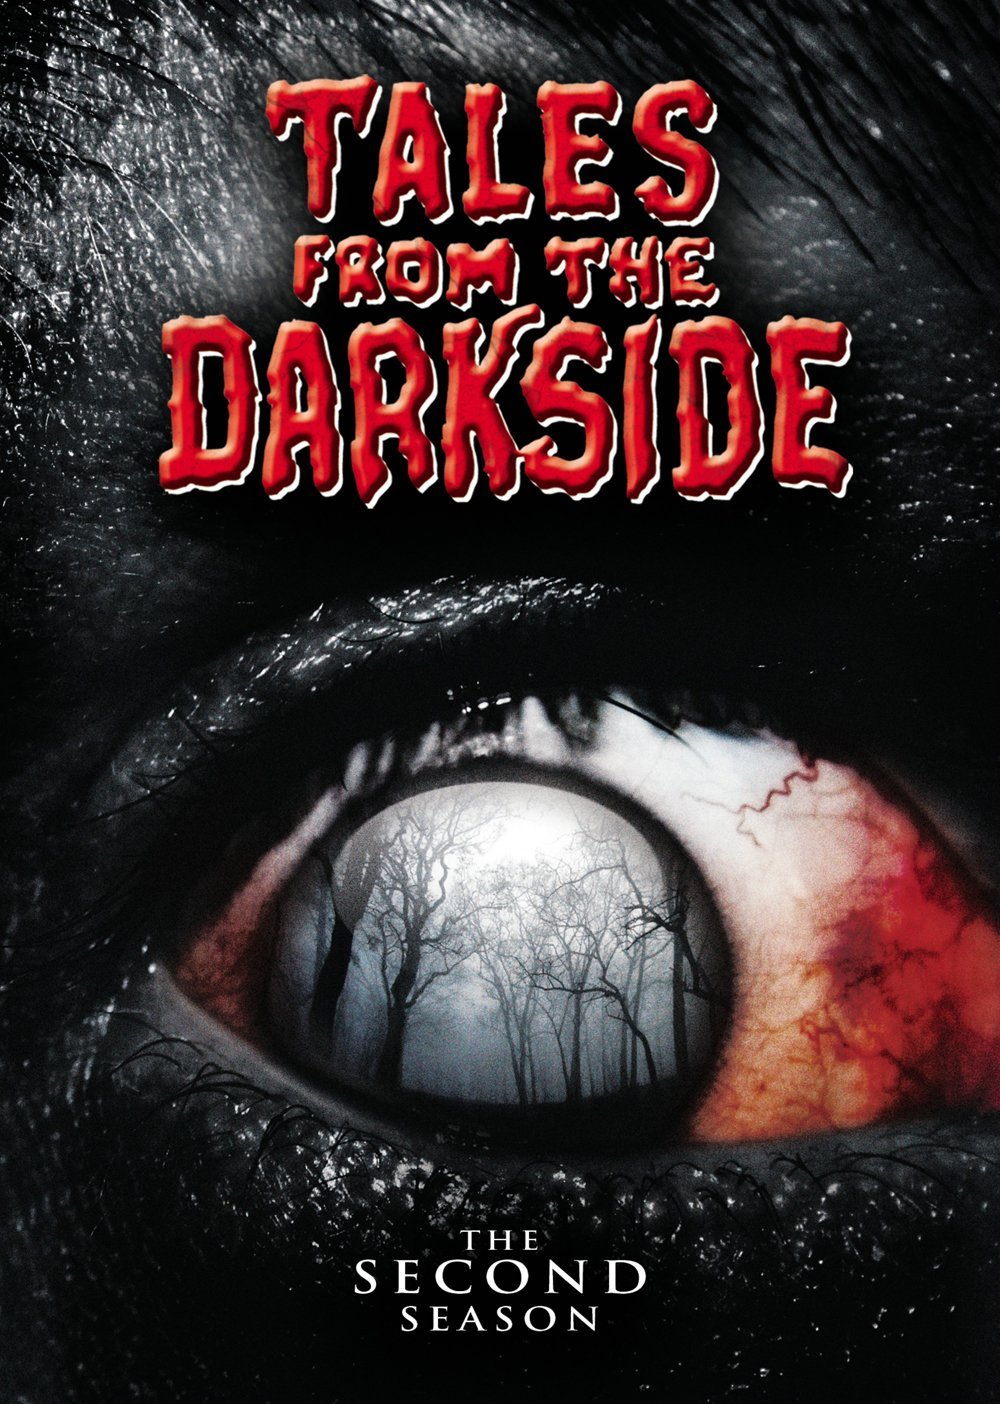 Tales from the Darkside Monsters in My Room (TV Episode 1985) - IMDb